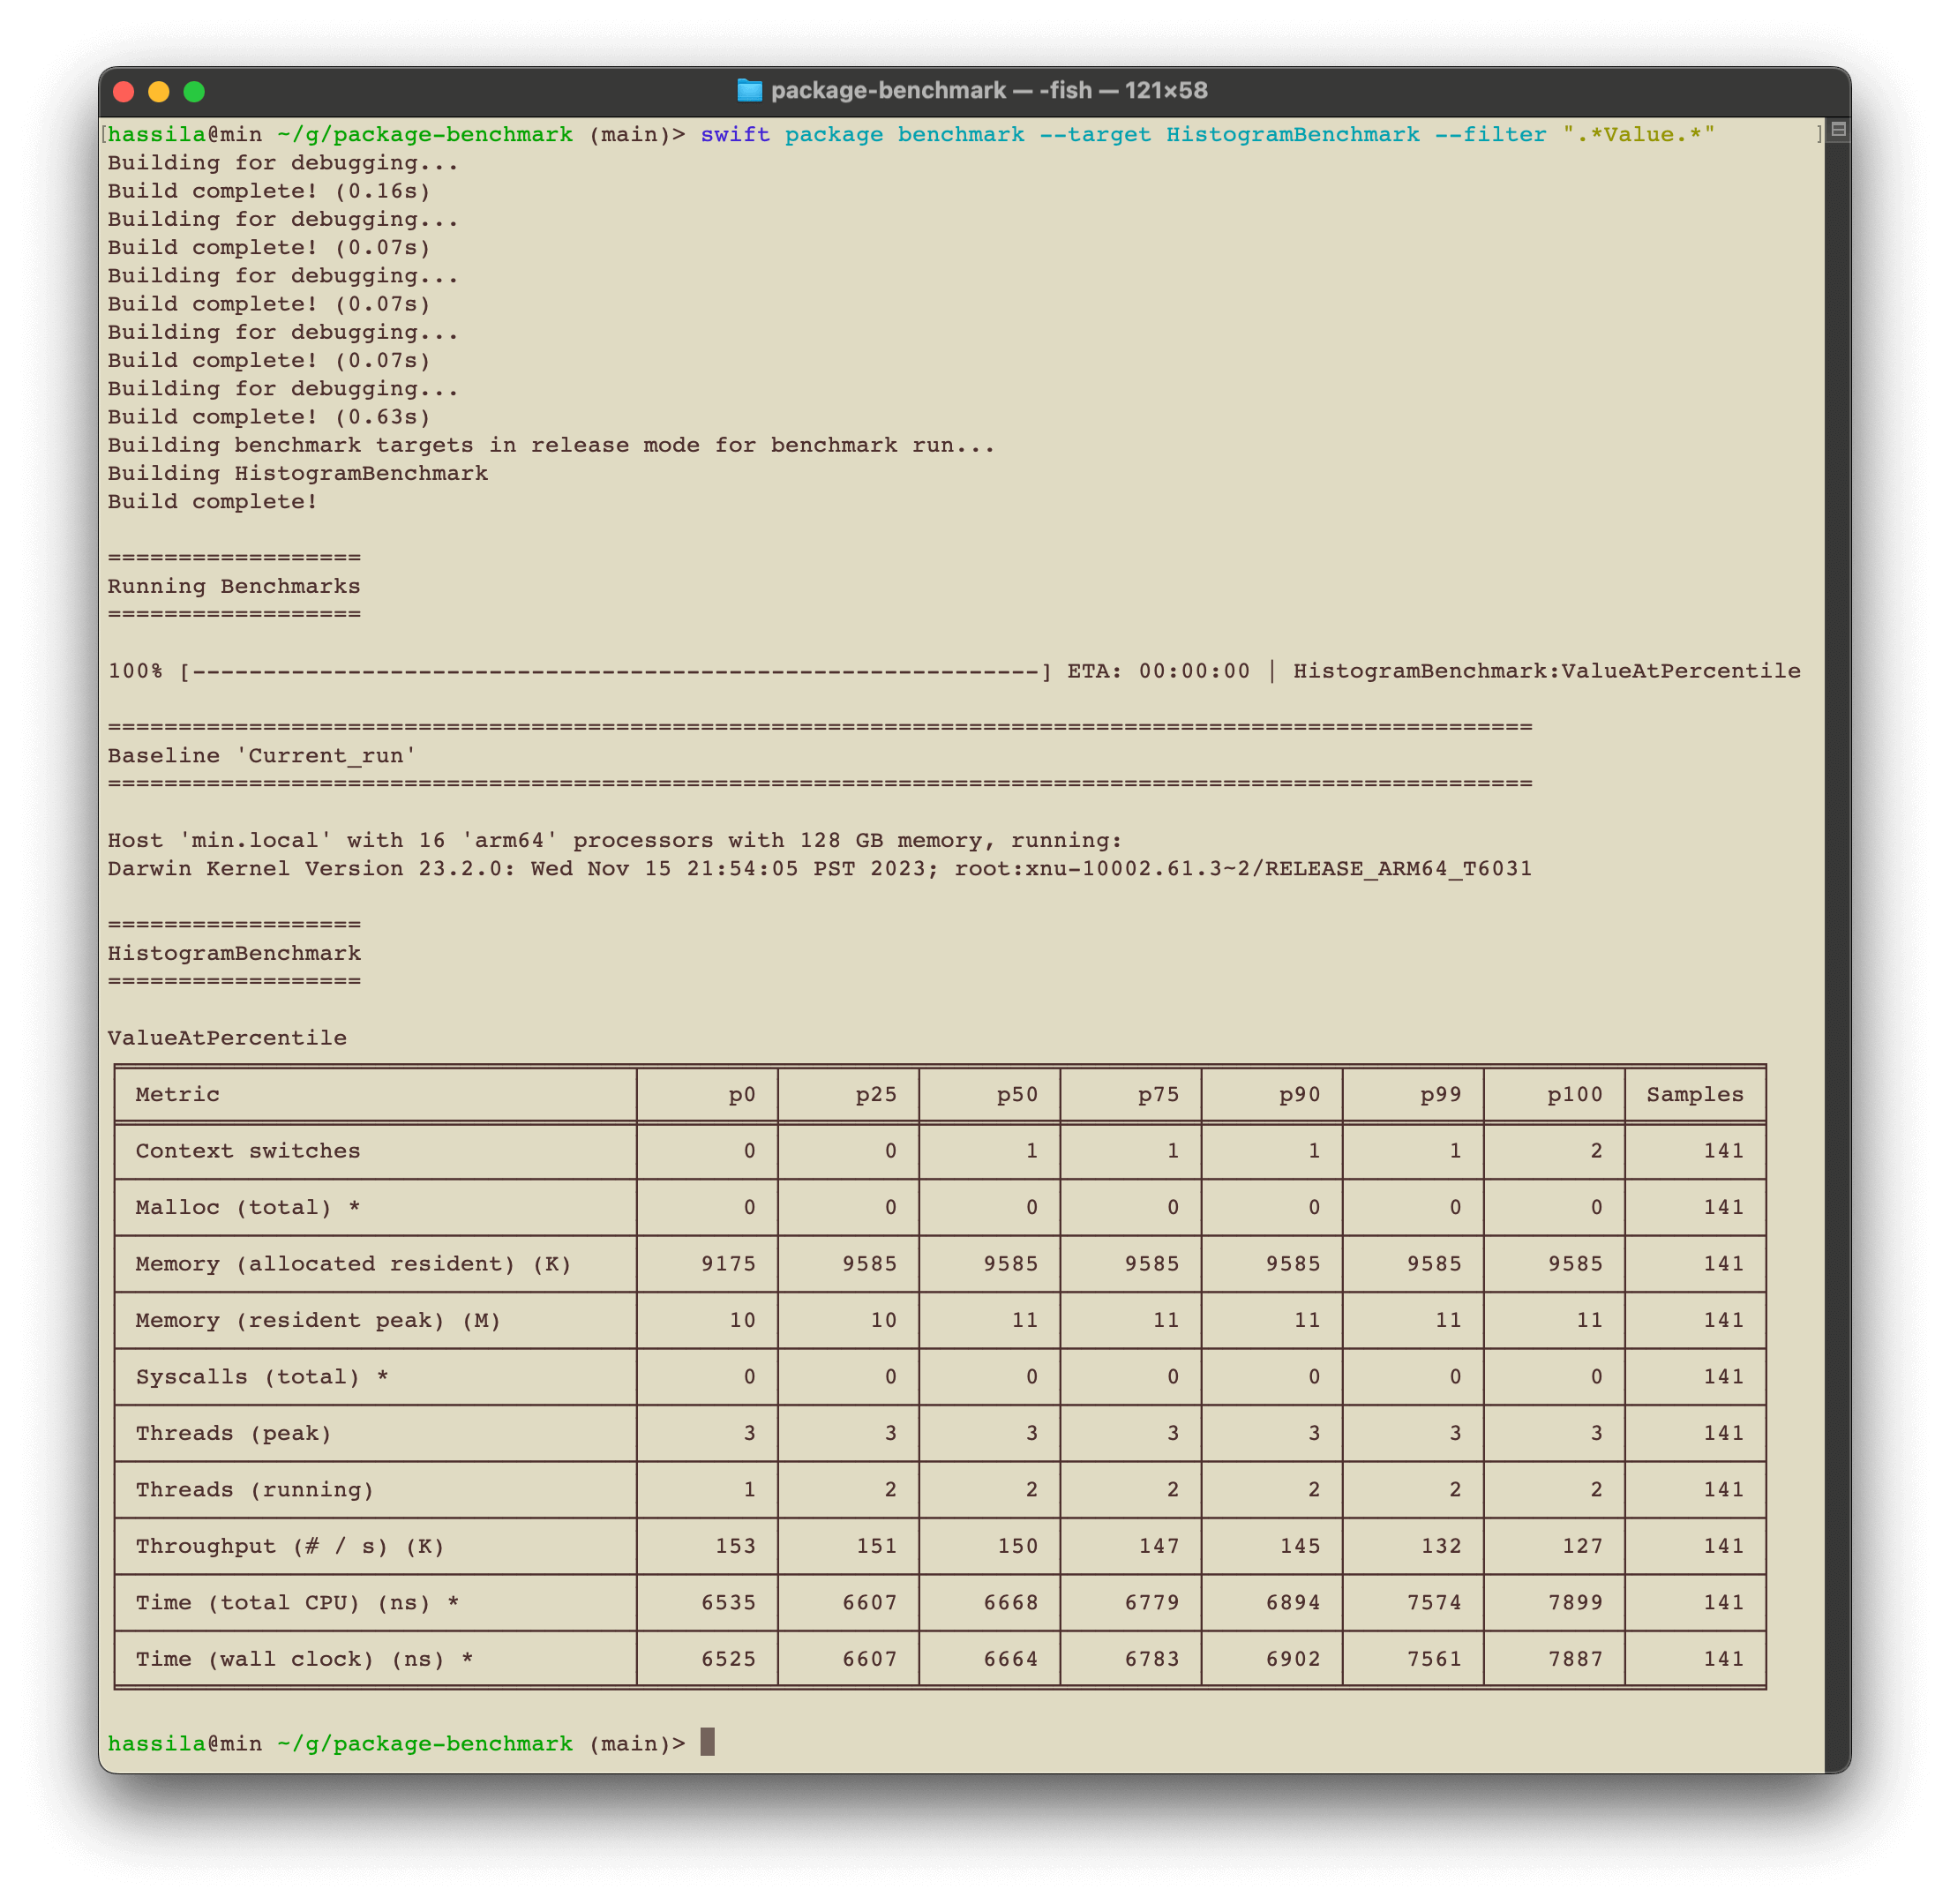 Sample text output for benchmarks